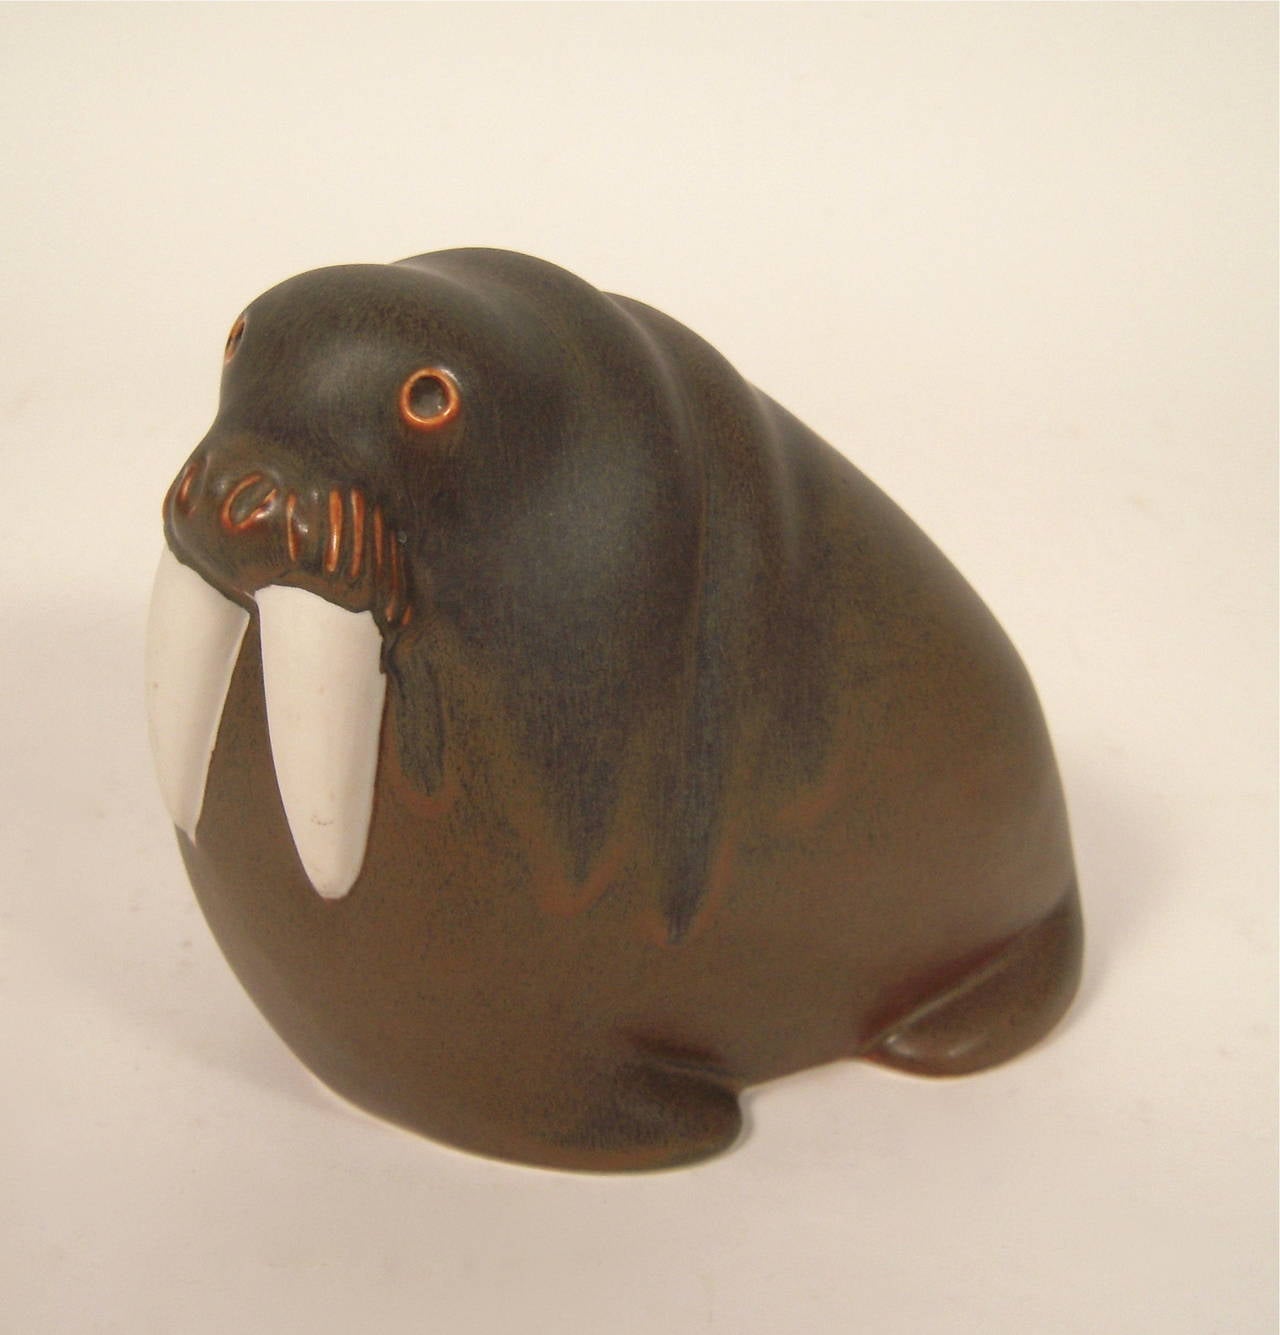 A vintage mid-century pottery sculpture of a walrus, designed by Taisto Kaasinen for Arabia Pottery, Finland, circa 1960,  glazed in matte brown and bluish tones with cream colored tusks, signed. 2 available.